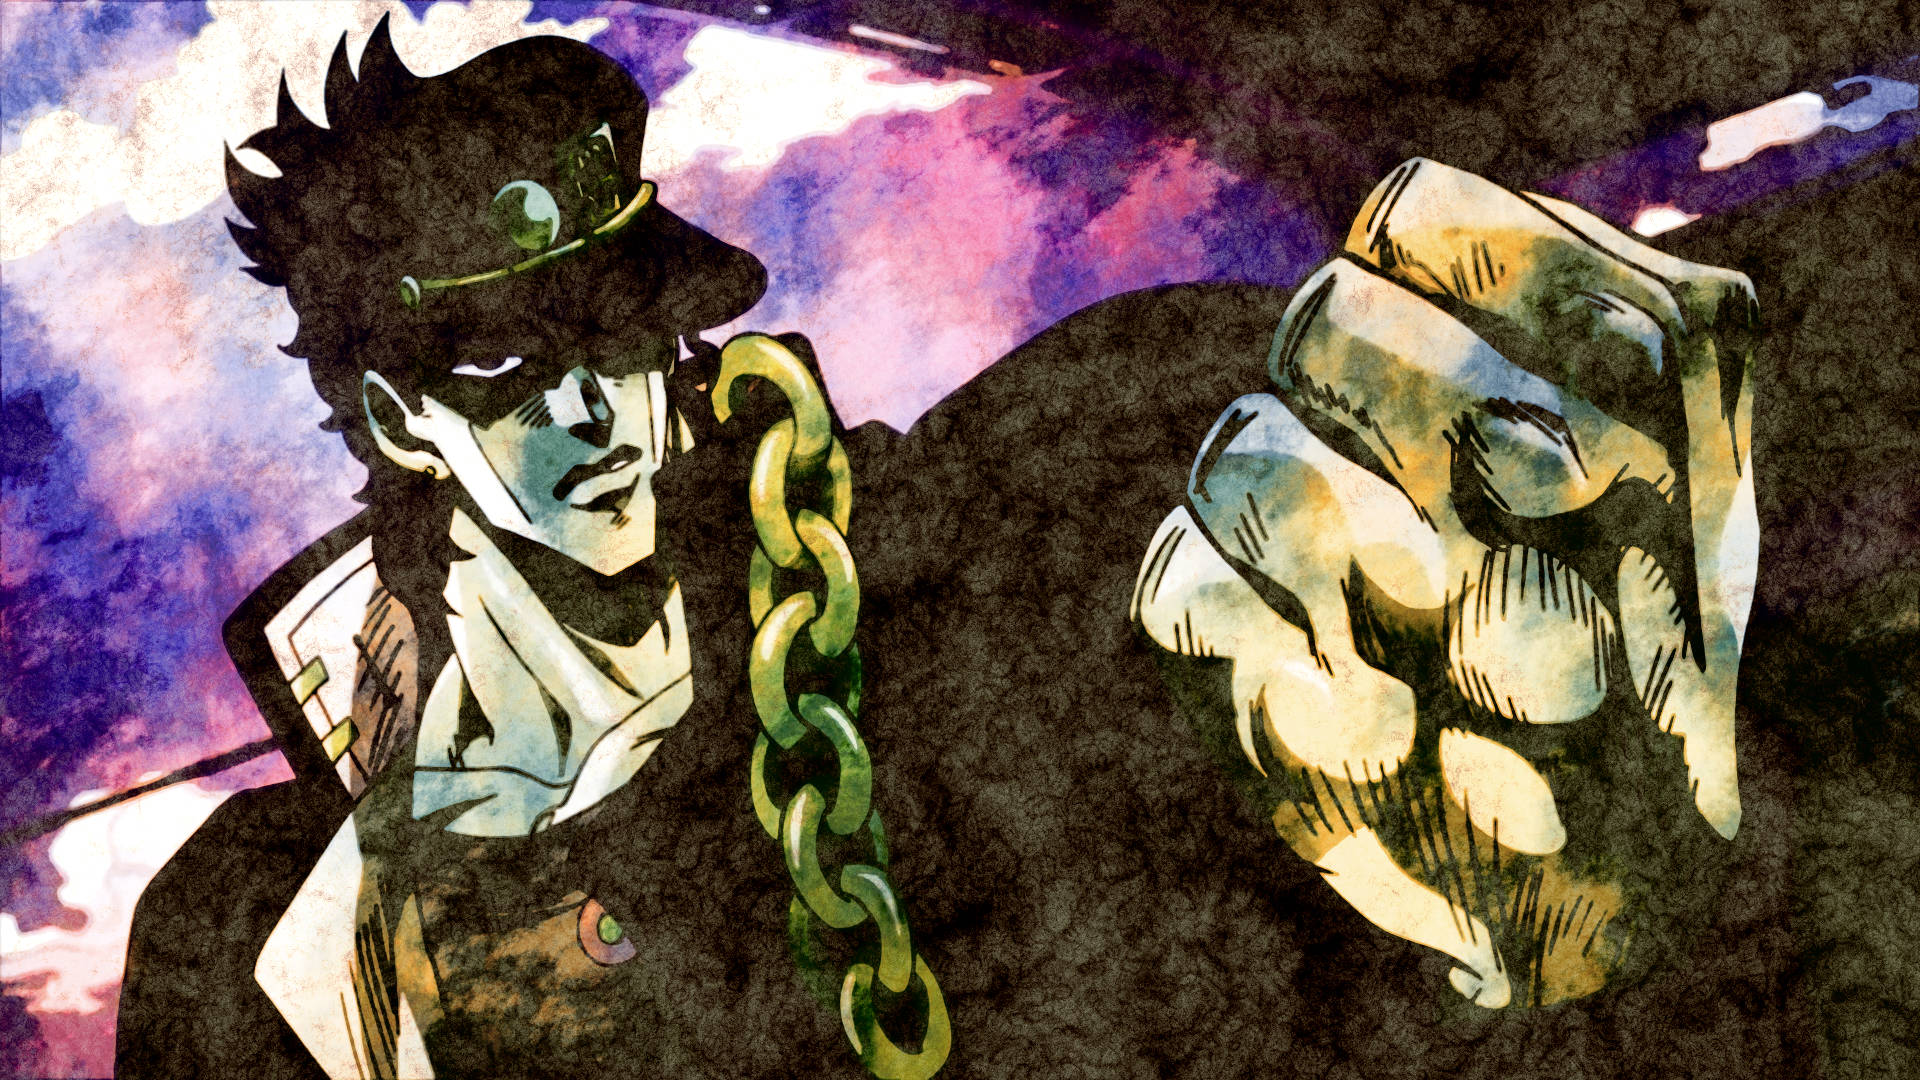 Image  Jotaro Kujo on the Journey for Justice Wallpaper